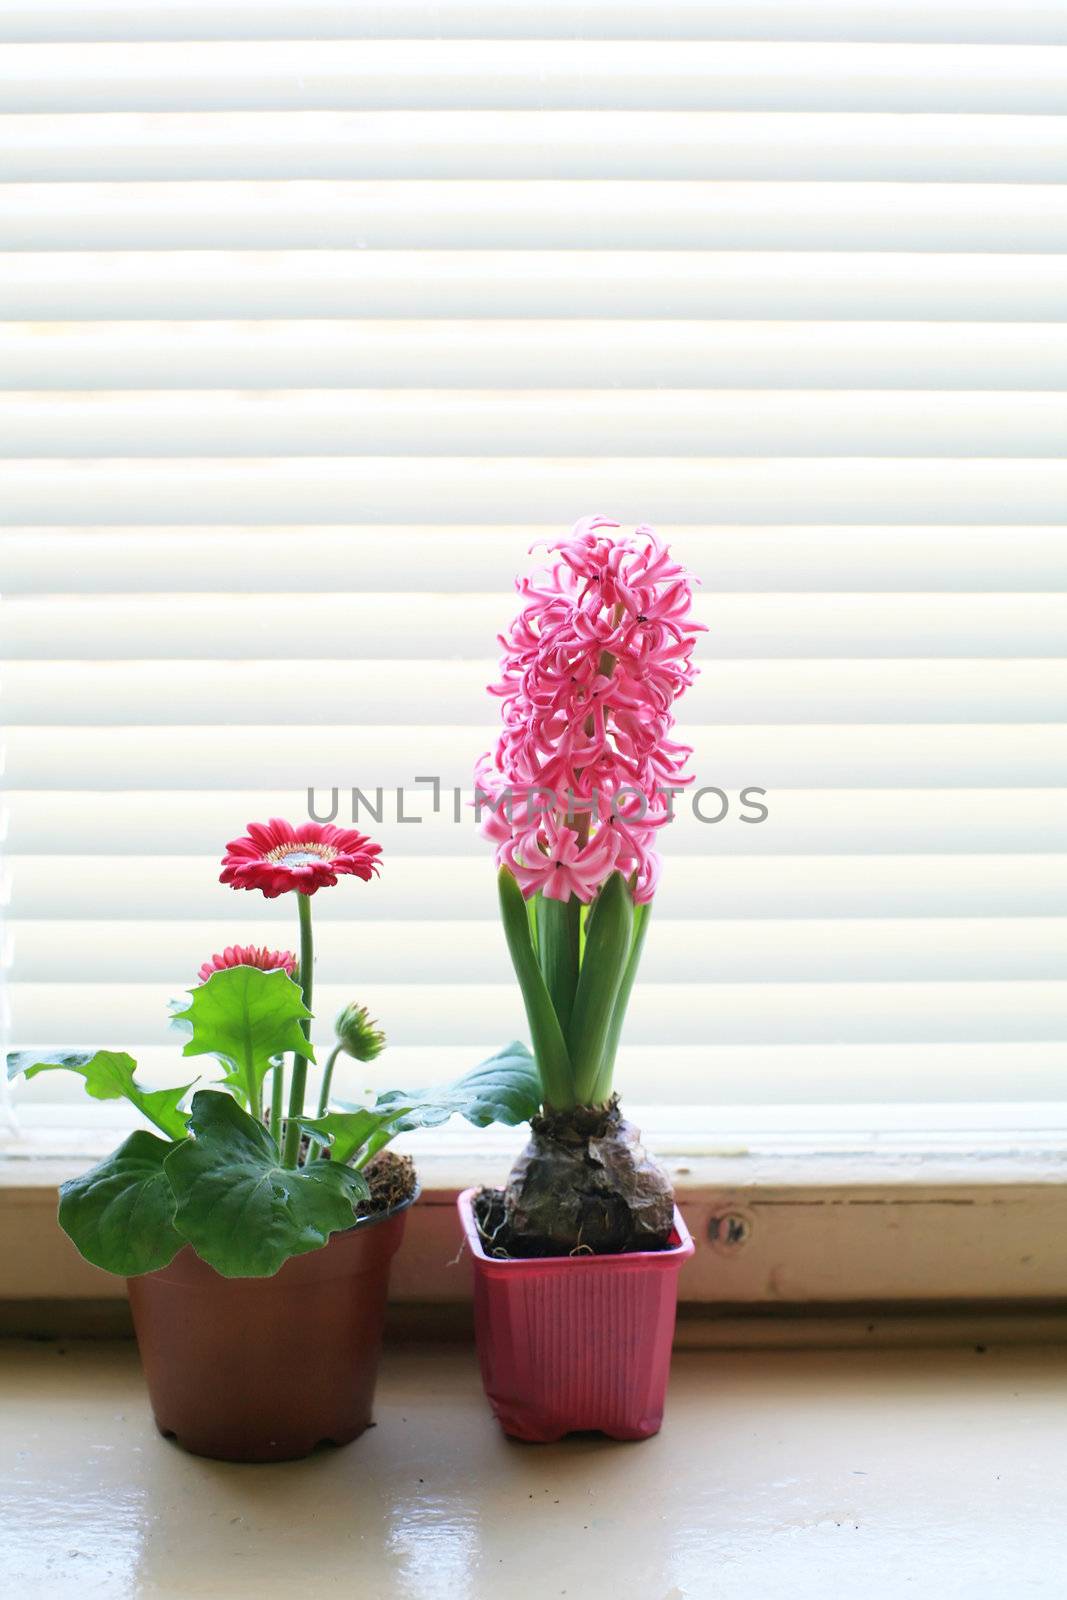 An image of two flowers in the pots